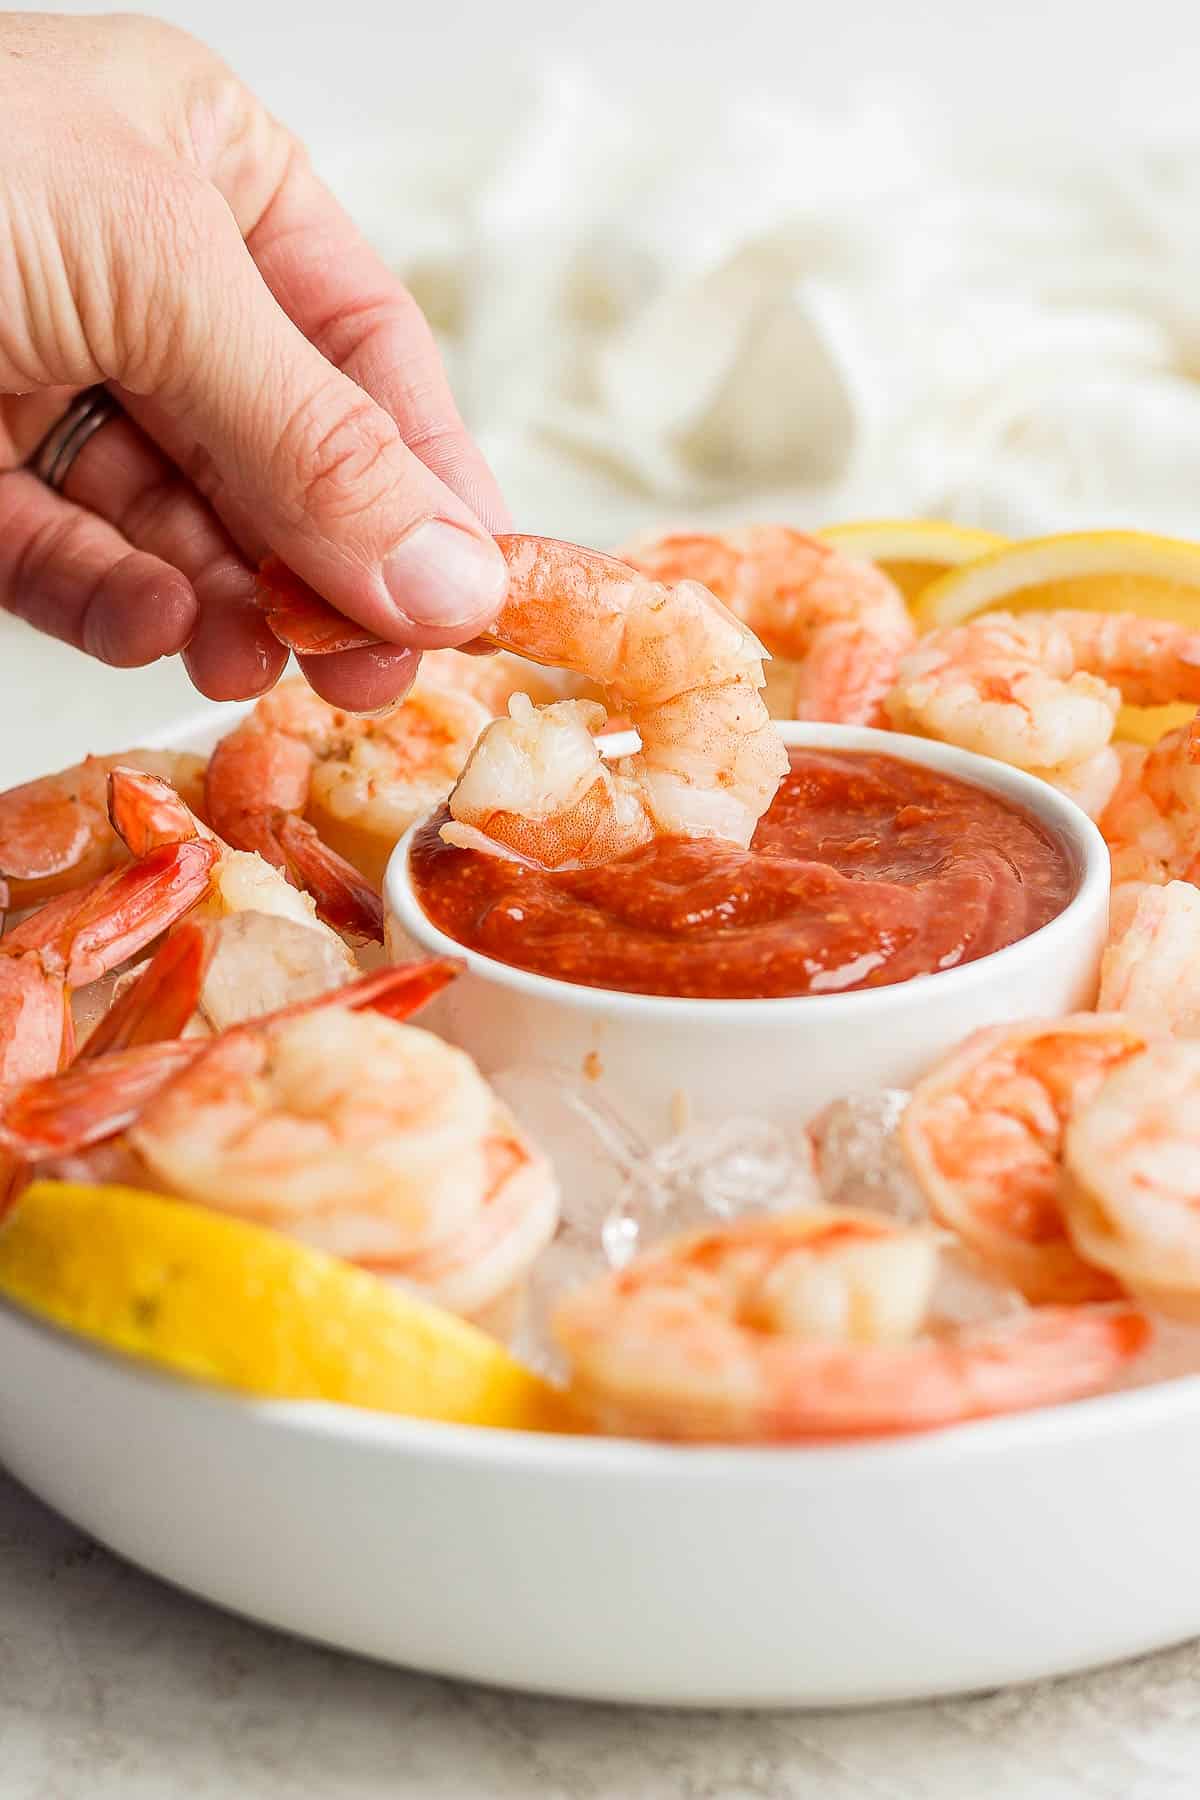 Shrimp getting dipped into cocktail sauce